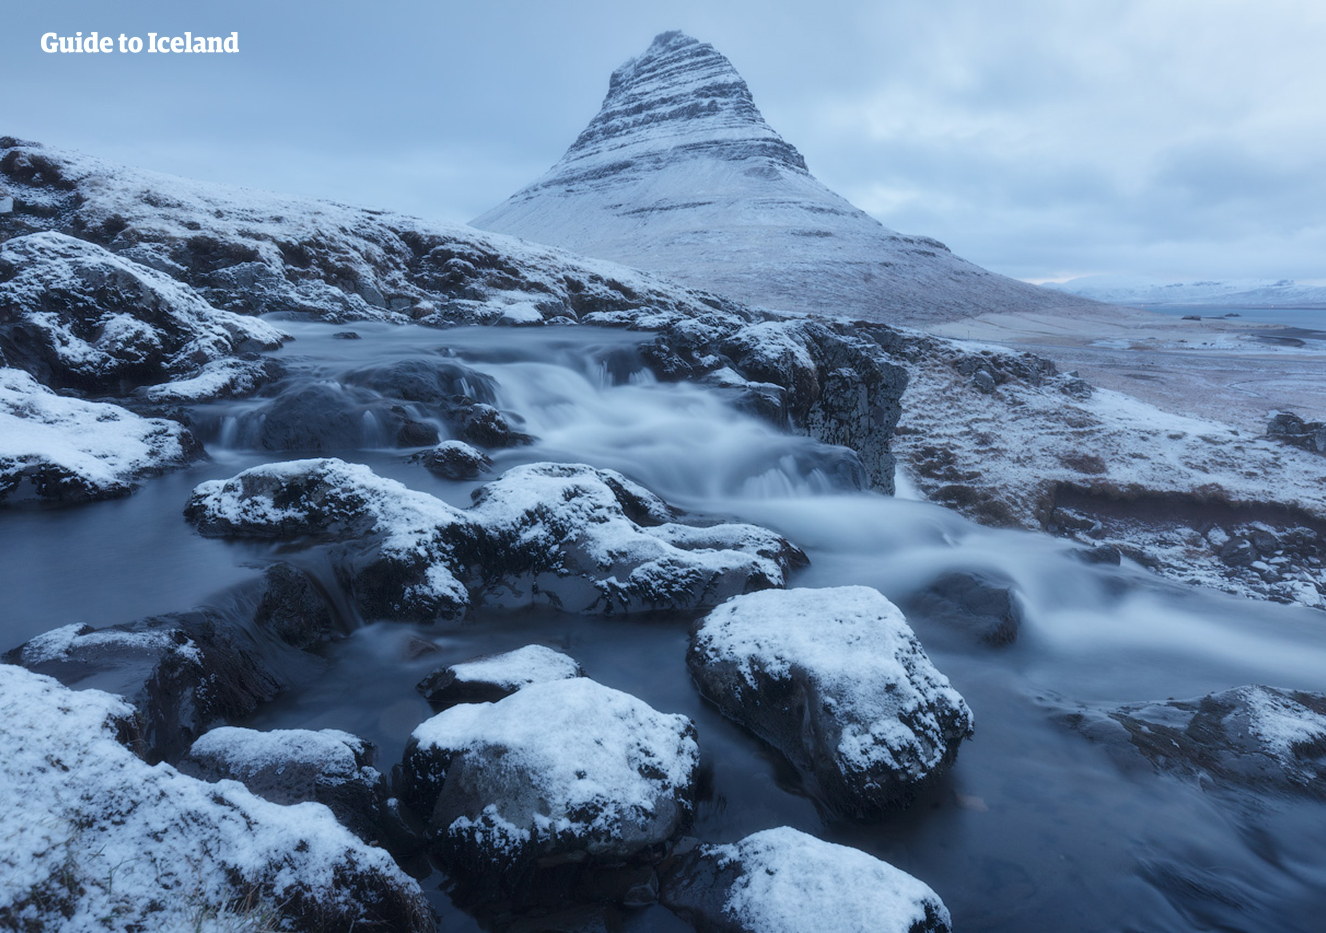 Mt. Kirkjufell, standing by the Snæfellsnes peninsula, takes on a striking look covered with snow during the Icelandic winter.